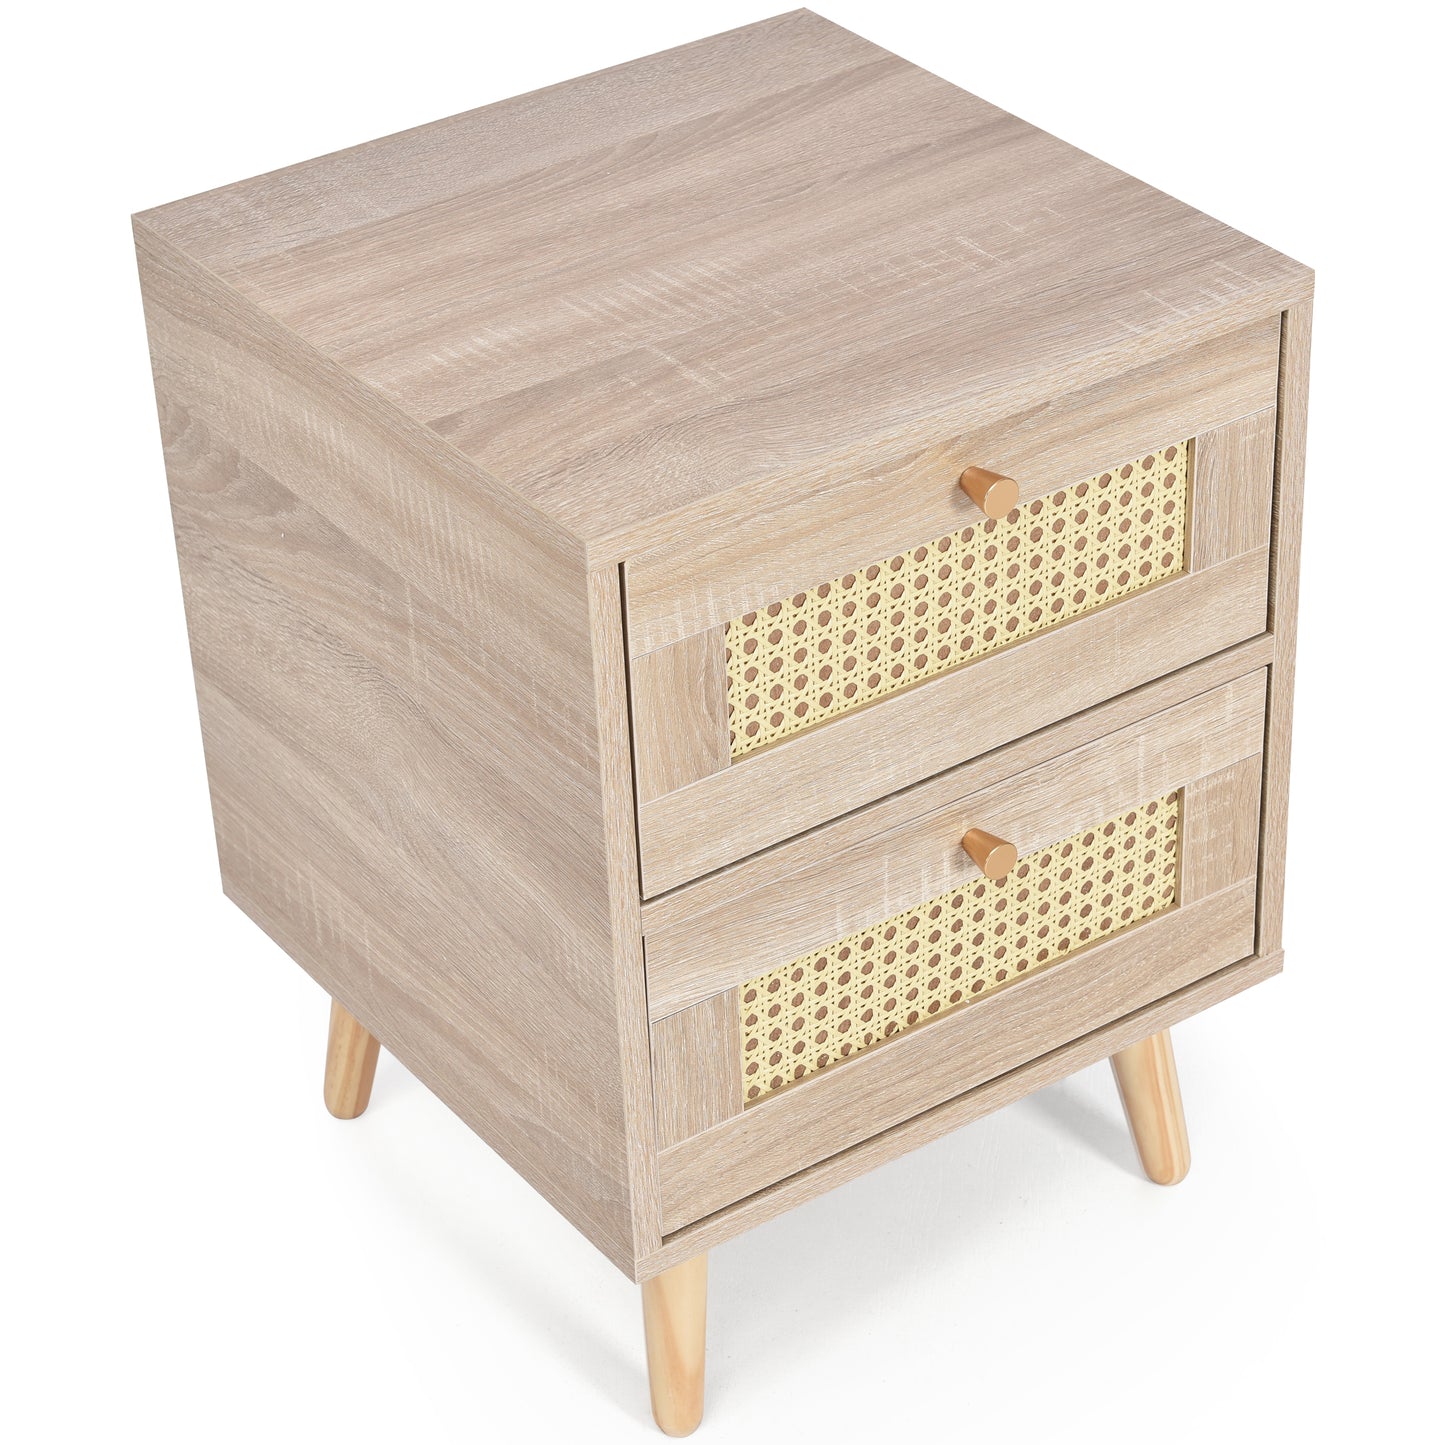 Natural Oak Rattan Nightstan Bedside Tables Rattan Drawer Sofa Table with 2 Drawers Wooden Bedroom Home Furniture Besontique